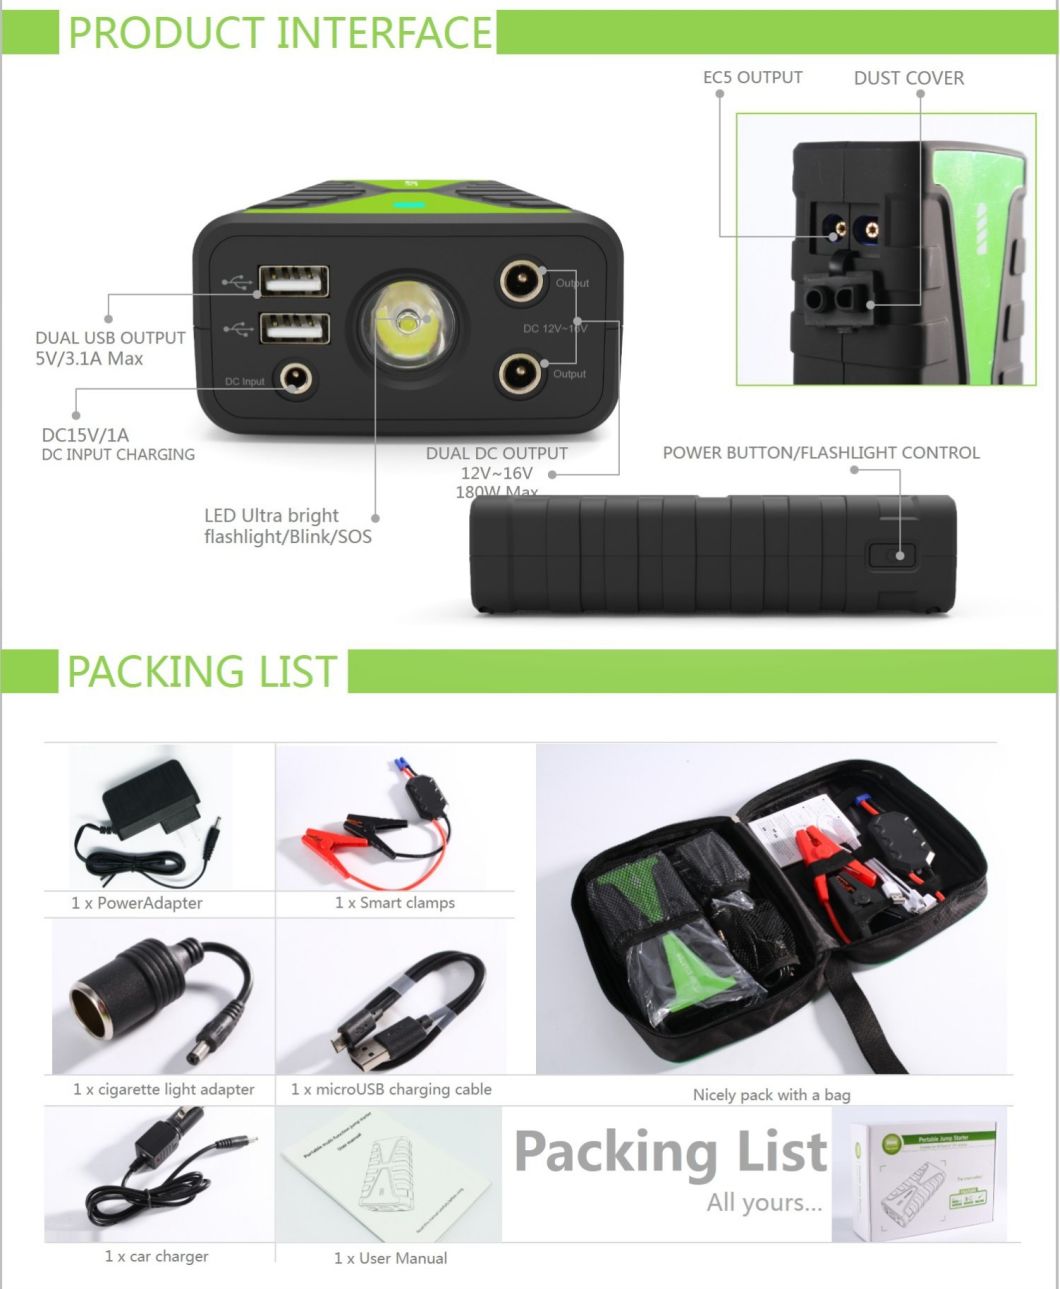 Portable Car Battery Jump Starter for Outdoor with LED Light